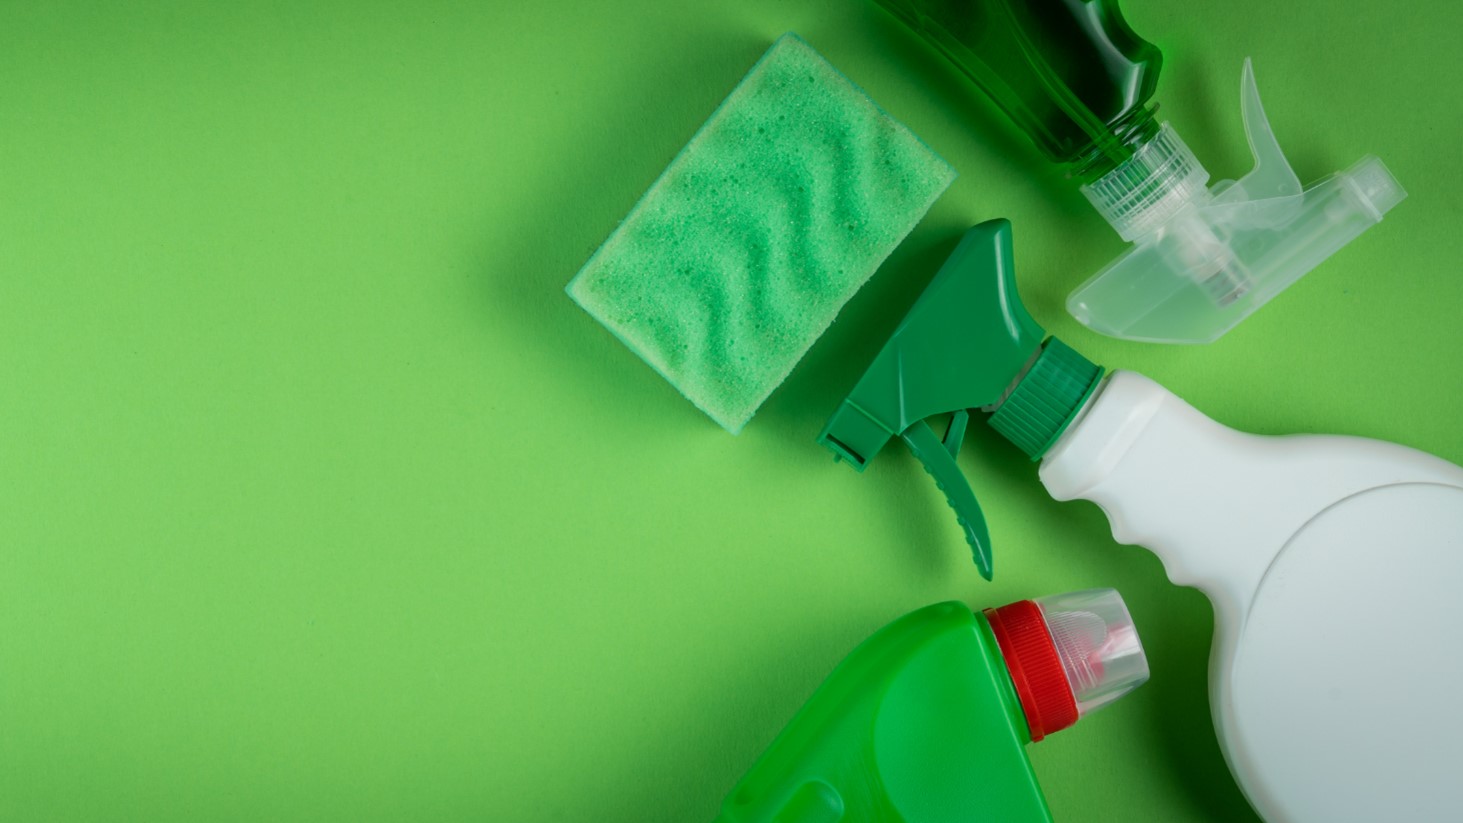 Green Cleaning Services in Olathe